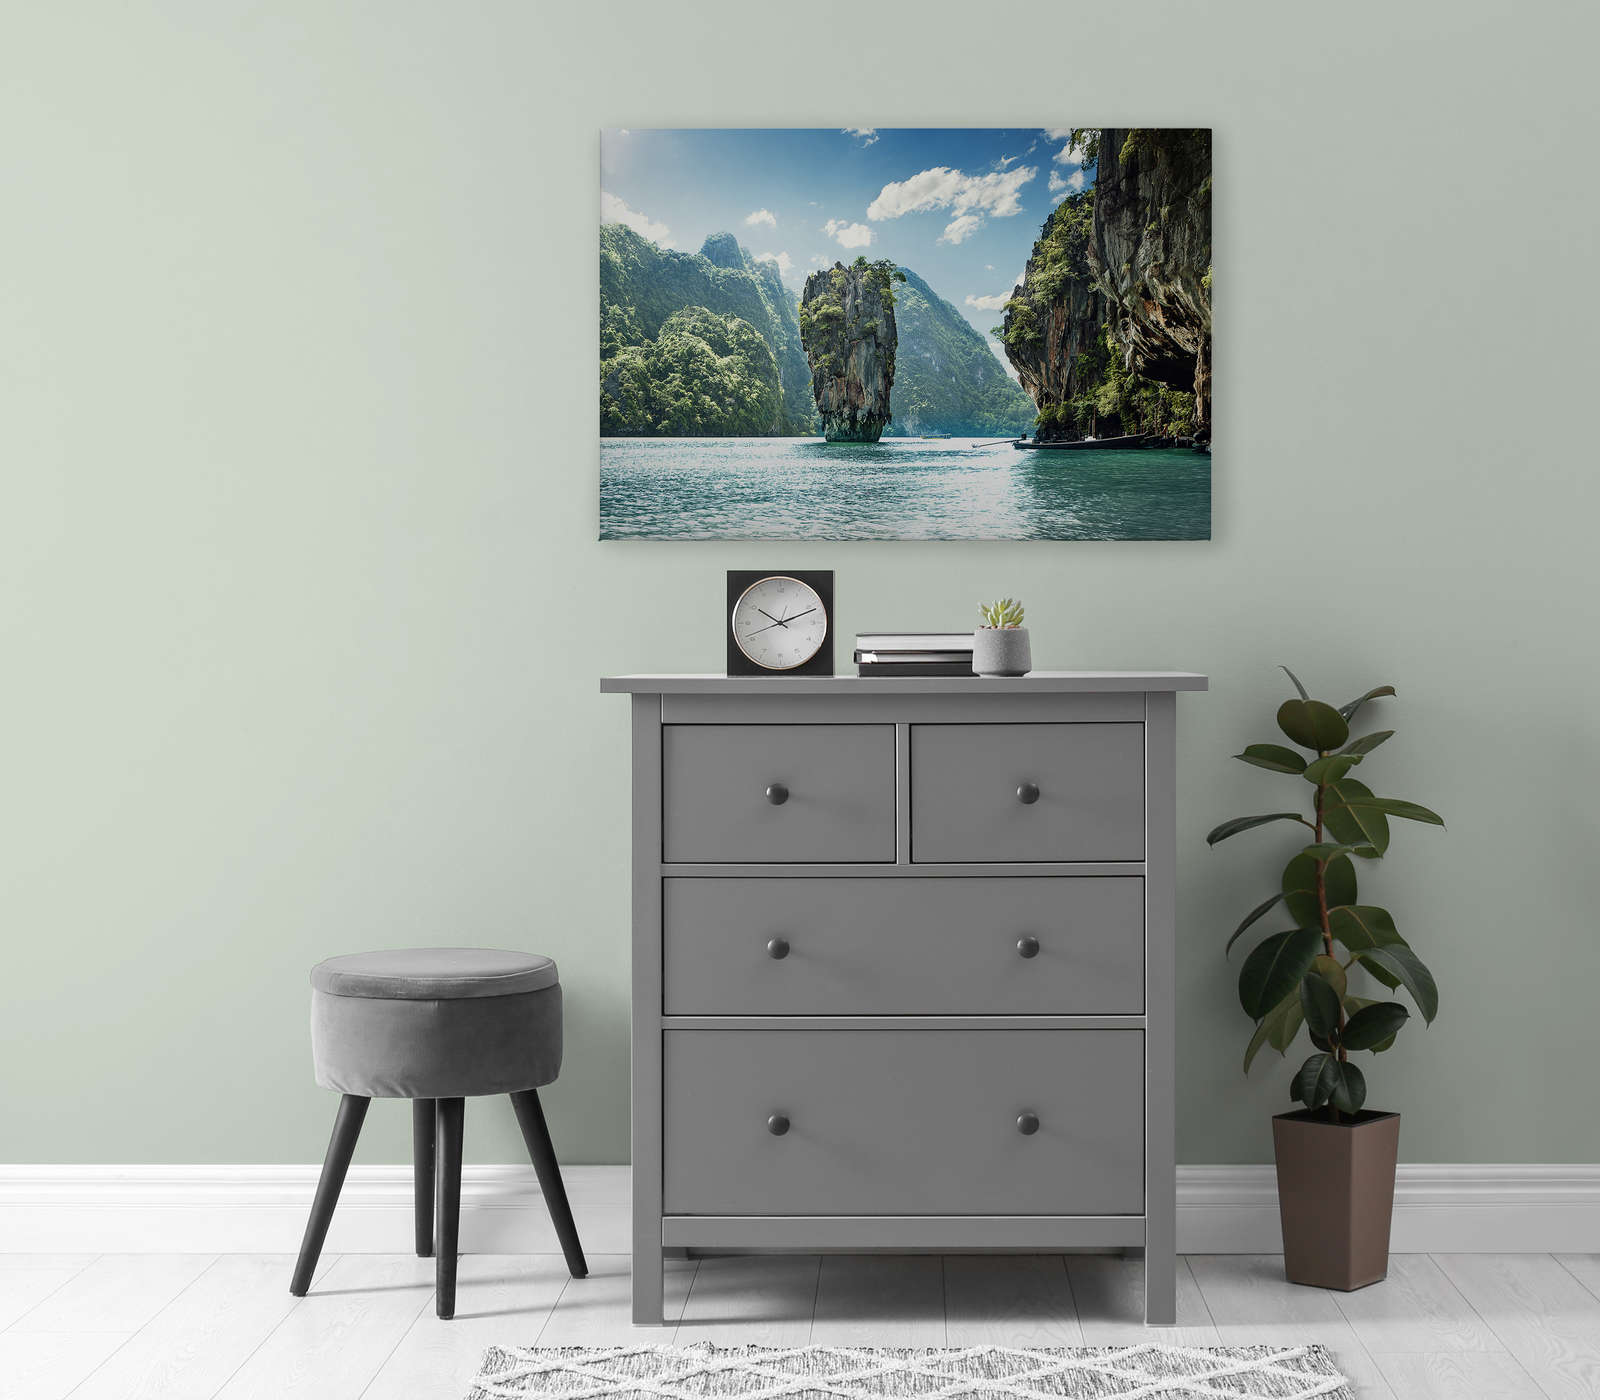             Canvas painting with paradise view of mountain landscape in Thailand - 0.90 m x 0.60 m
        